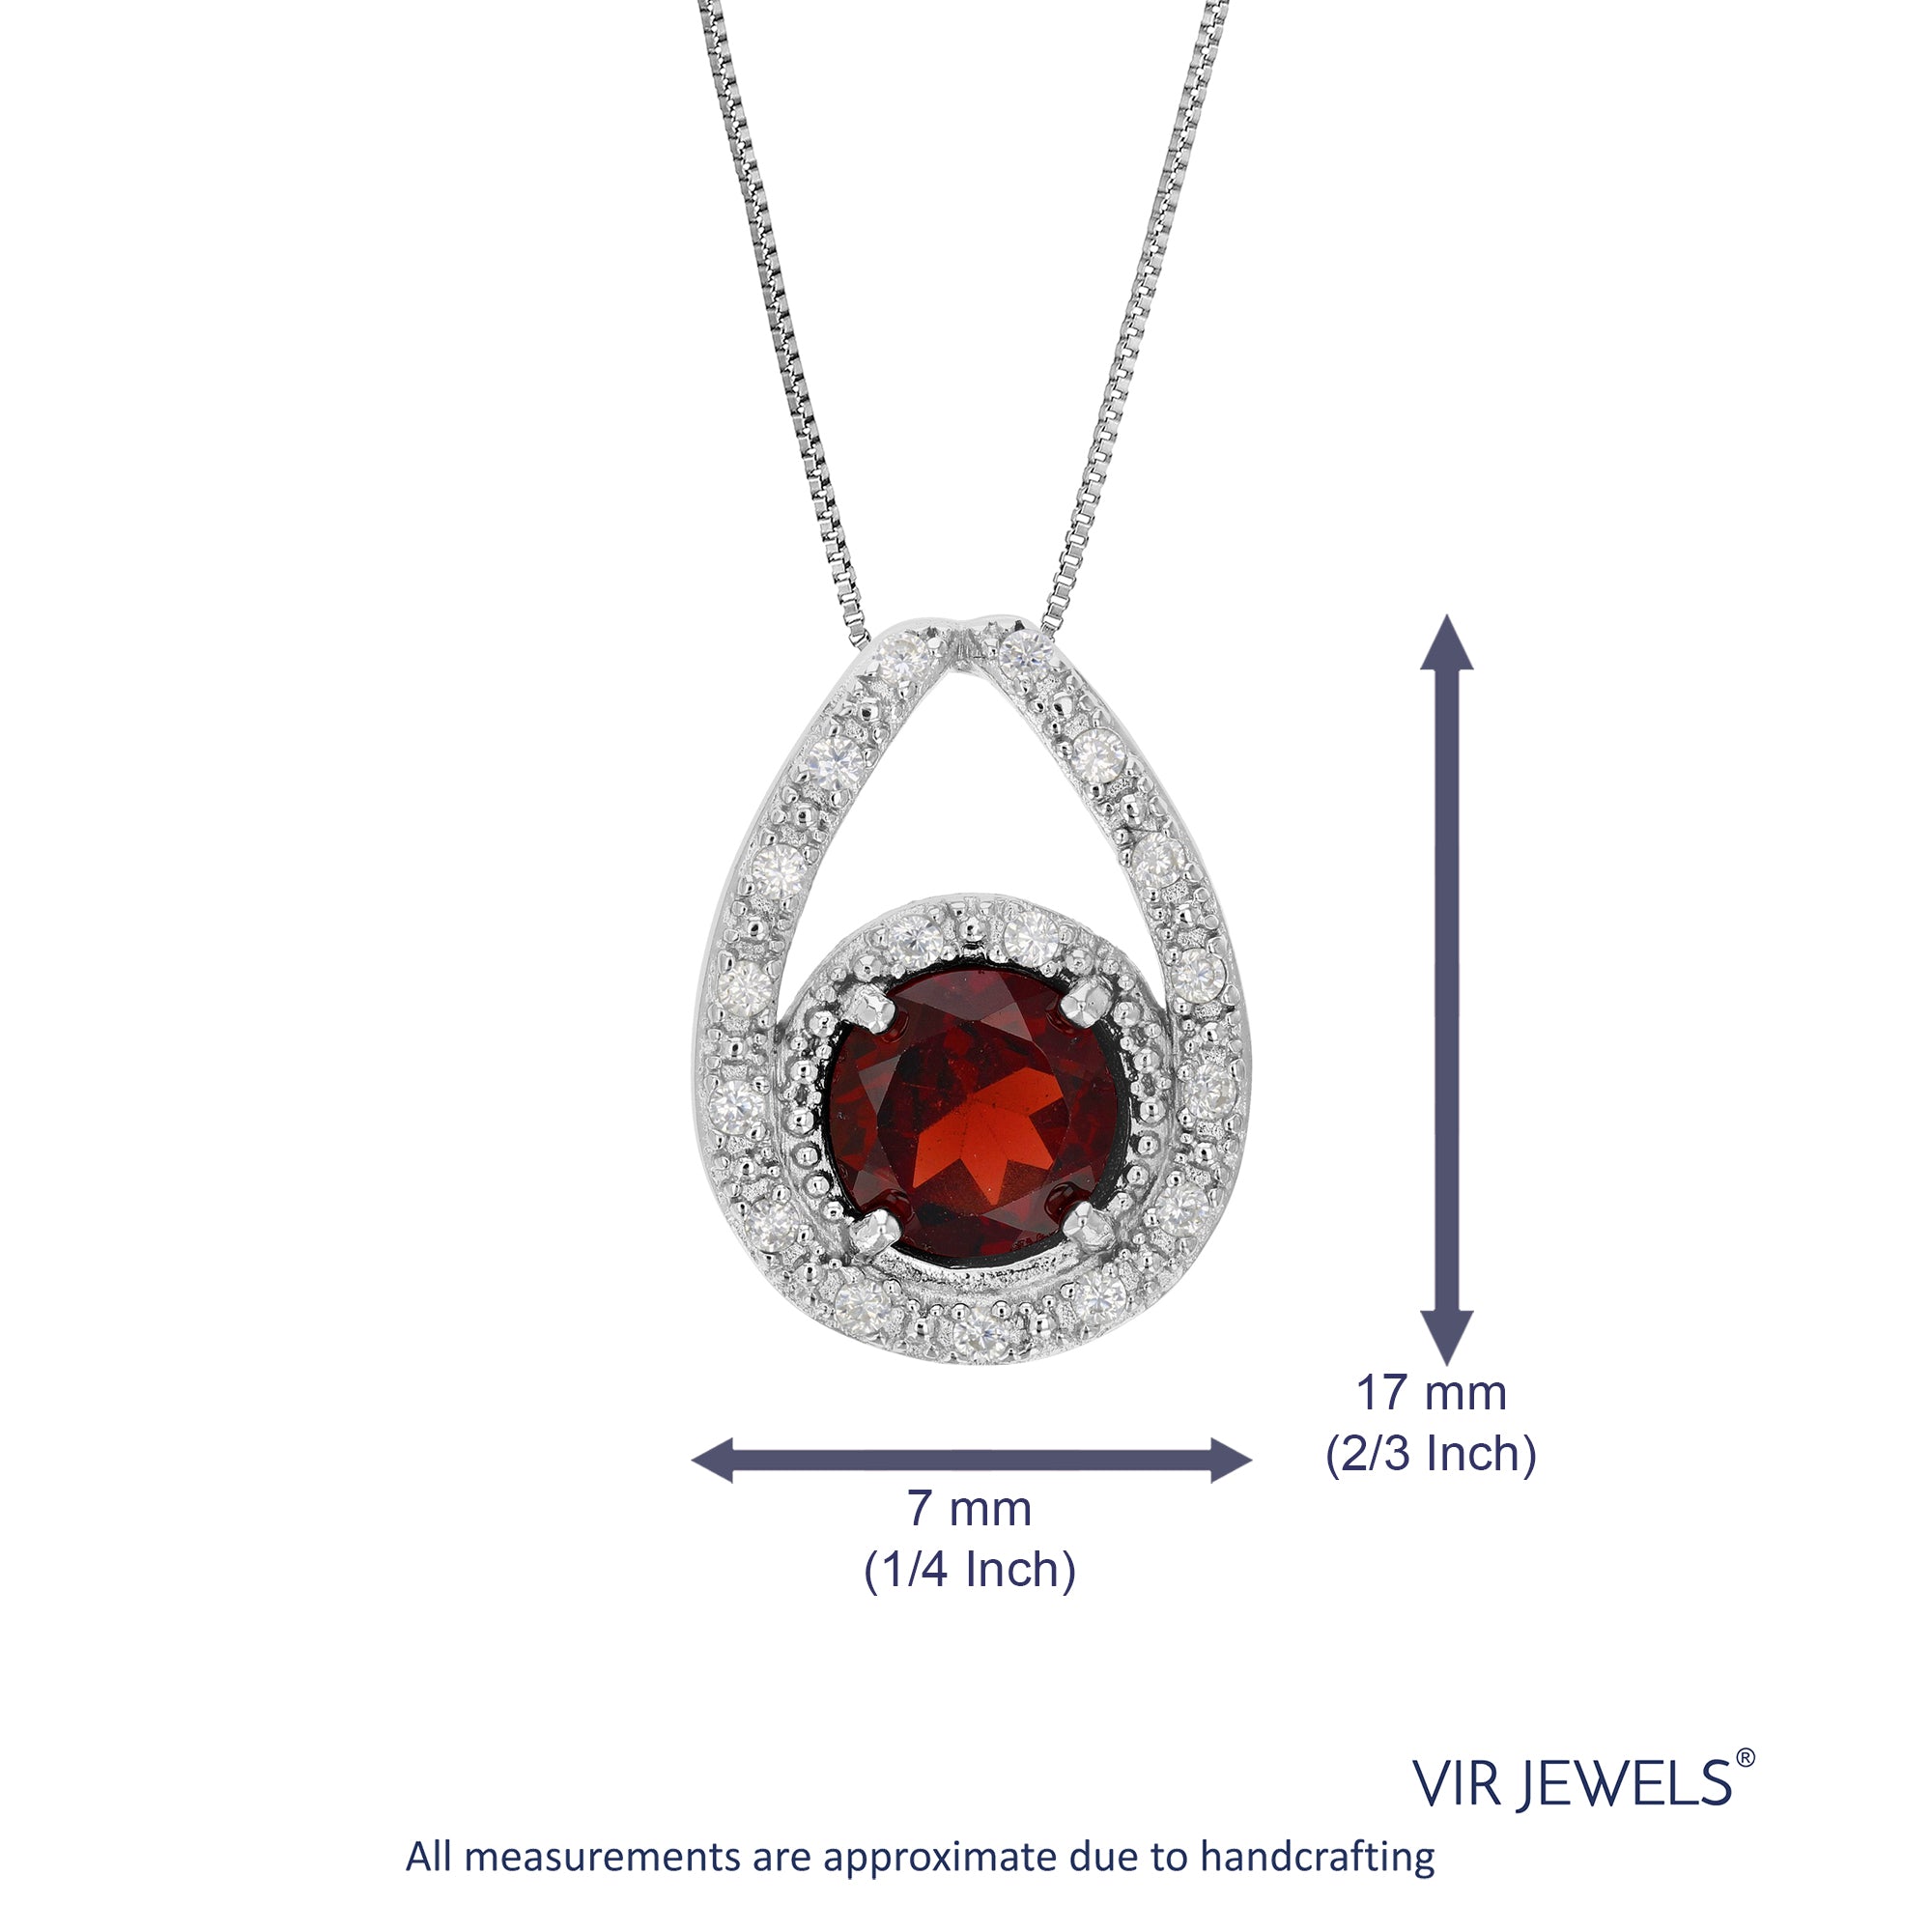 1.05 cttw Pendant Necklace, Garnet Pendant Necklace for Women in .925 Sterling Silver with Rhodium, 18 Inch Chain, Prong Setting